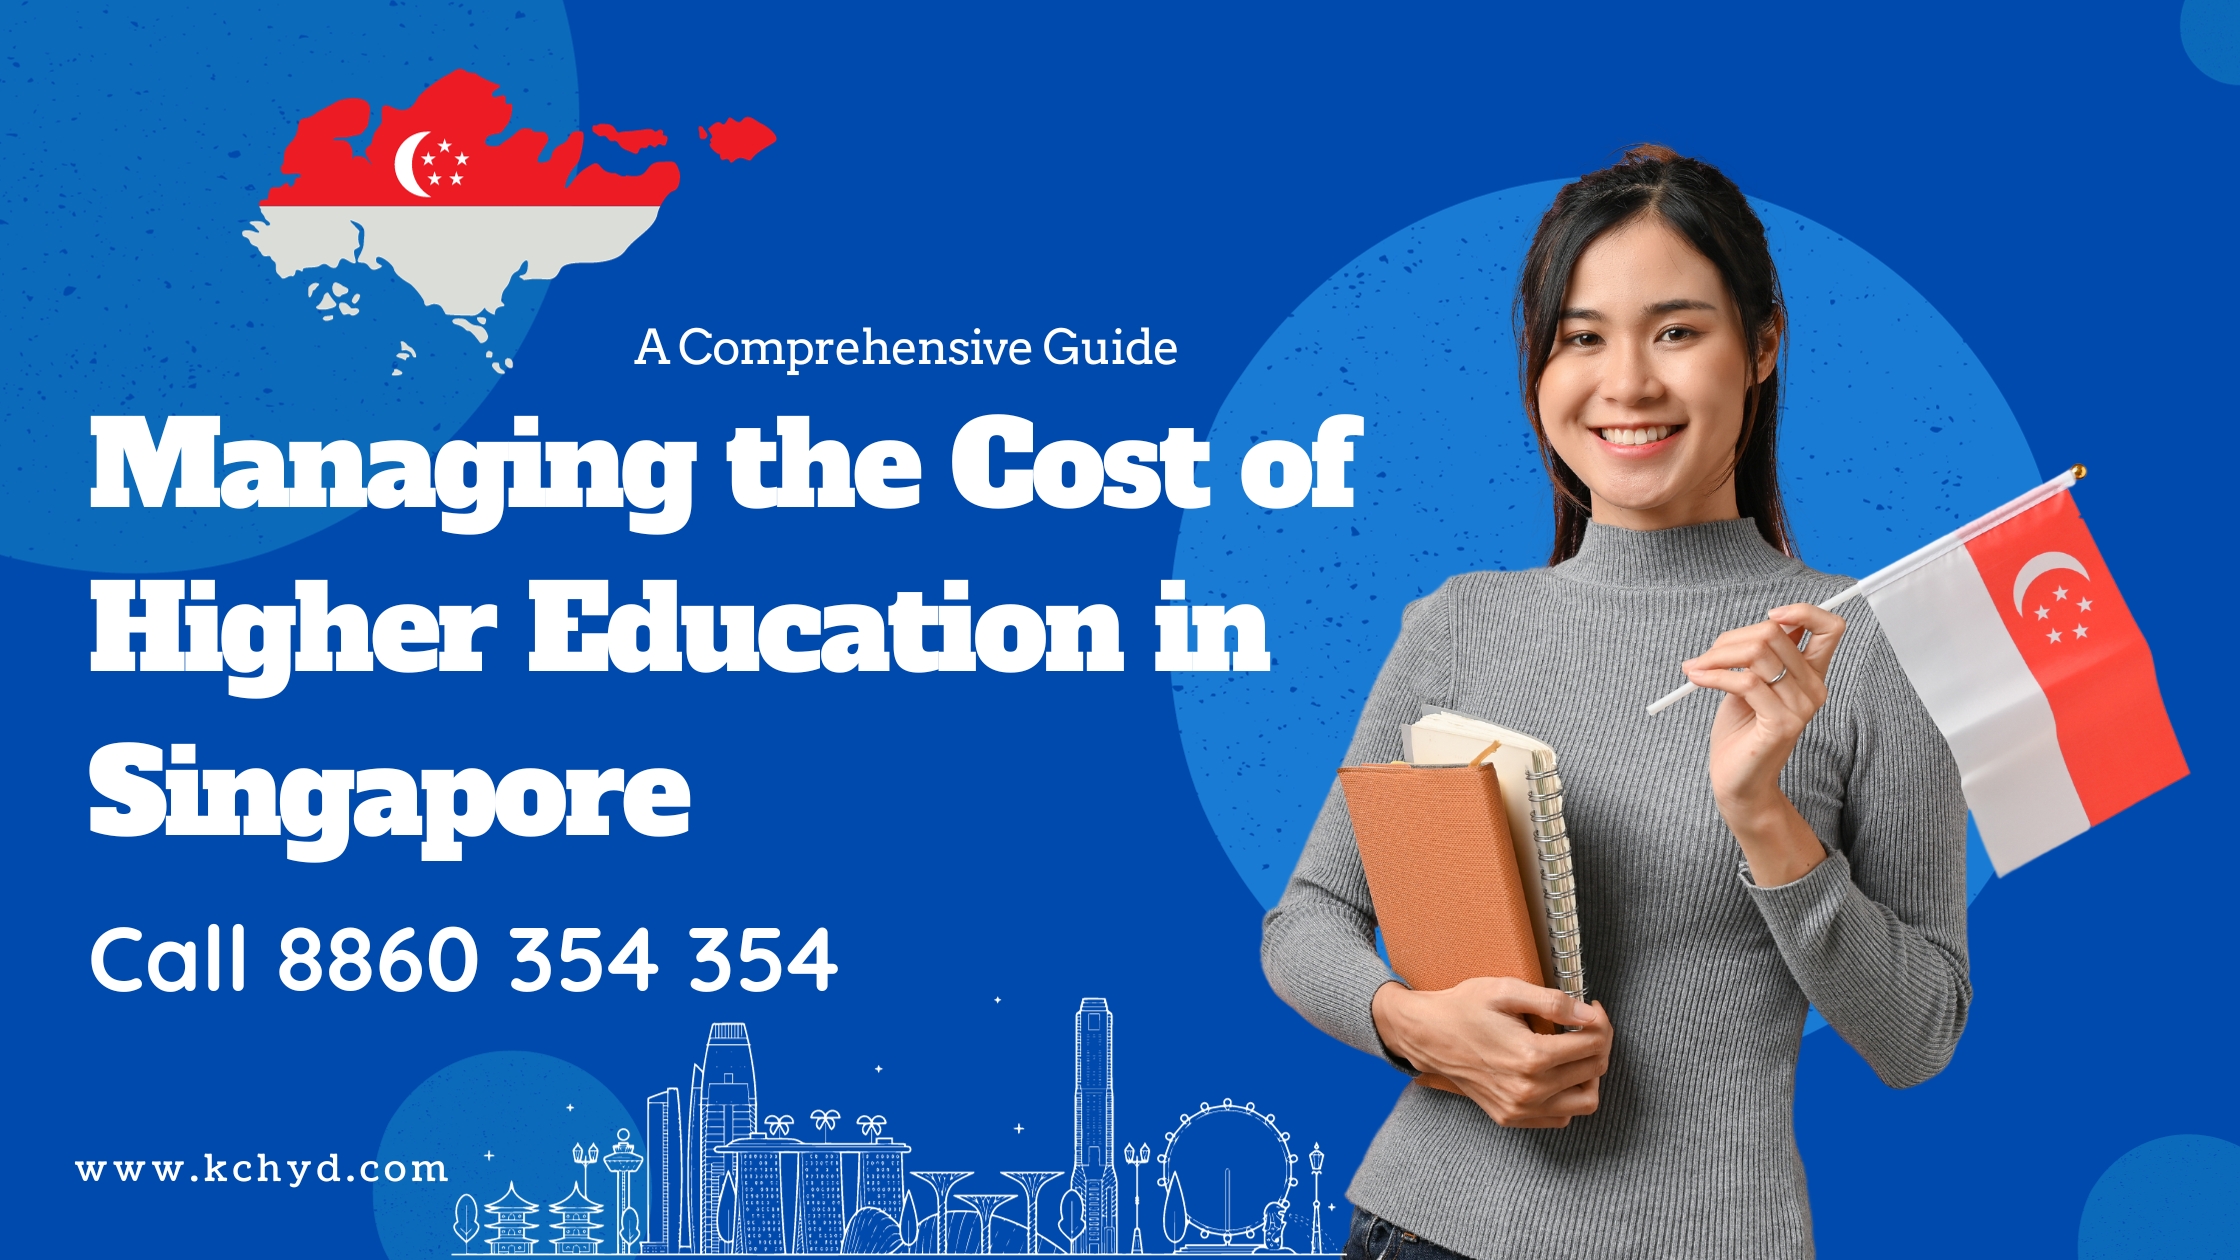 Managing the Cost of Higher Education in Singapore: A Comprehensive Guide